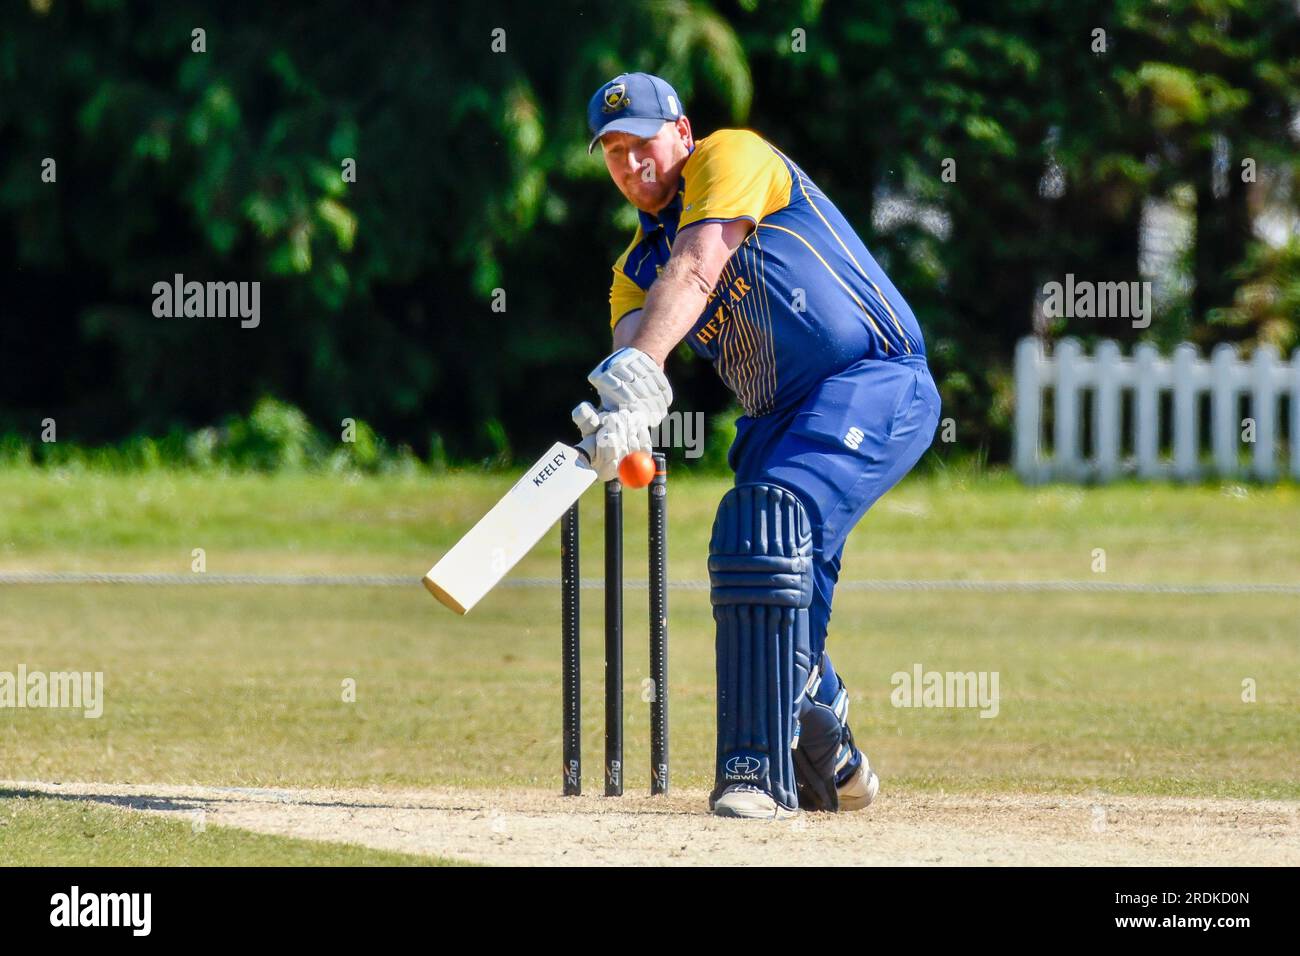 Clydach, Wales. 3 June 2023. Steff Davies of Clydach batting during the South Wales Premier Cricket League Division Two match between Clydach and Chepstow at Waverley Park in Clydach, Wales, UK on 3 June 2023. Credit: Duncan Thomas/Majestic Media. Stock Photo